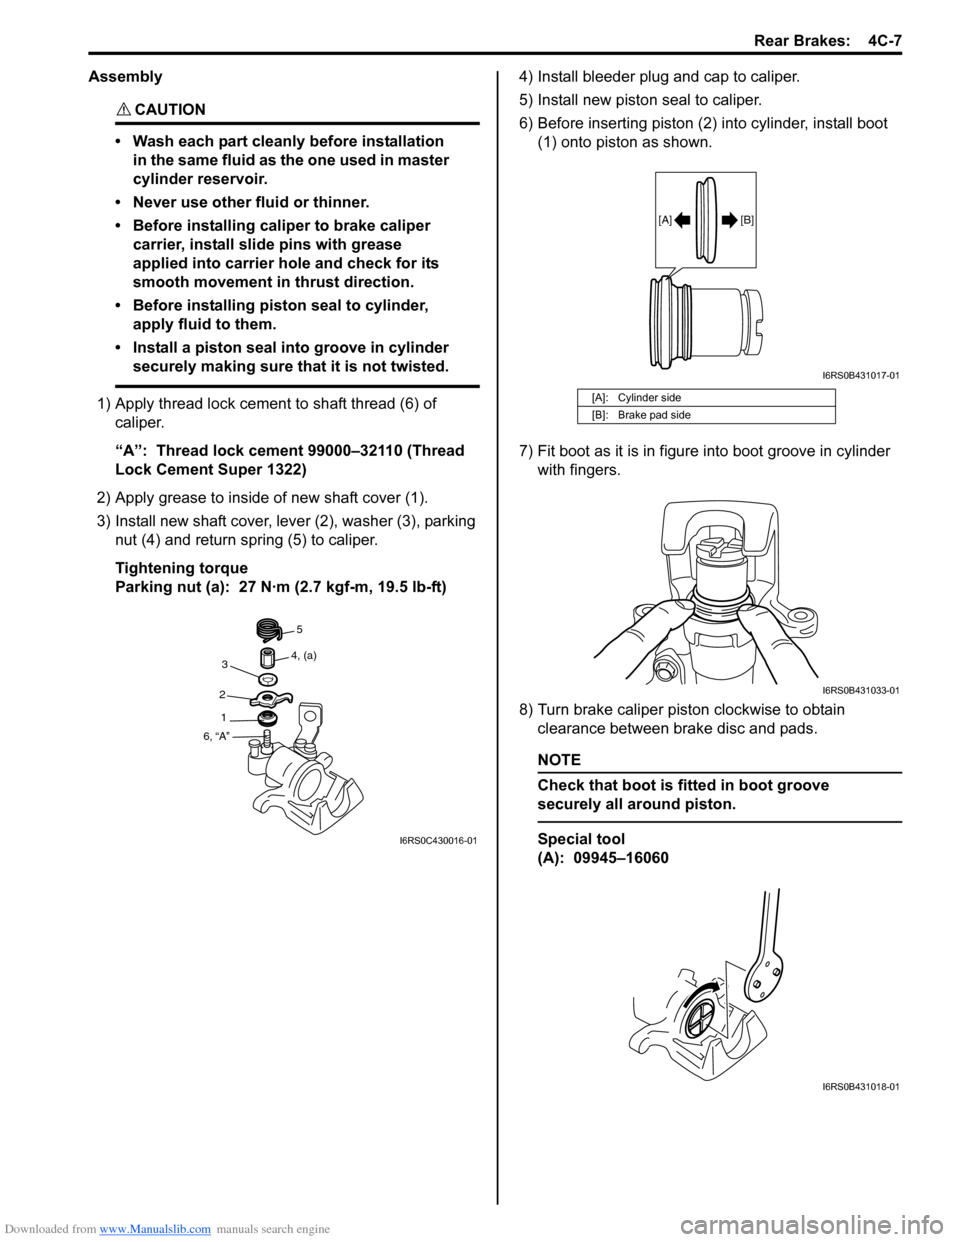 SUZUKI SWIFT 2006 2.G Service Workshop Manual Downloaded from www.Manualslib.com manuals search engine Rear Brakes:  4C-7
Assembly
CAUTION! 
• Wash each part cleanly before installation in the same fluid as the one used in master 
cylinder rese